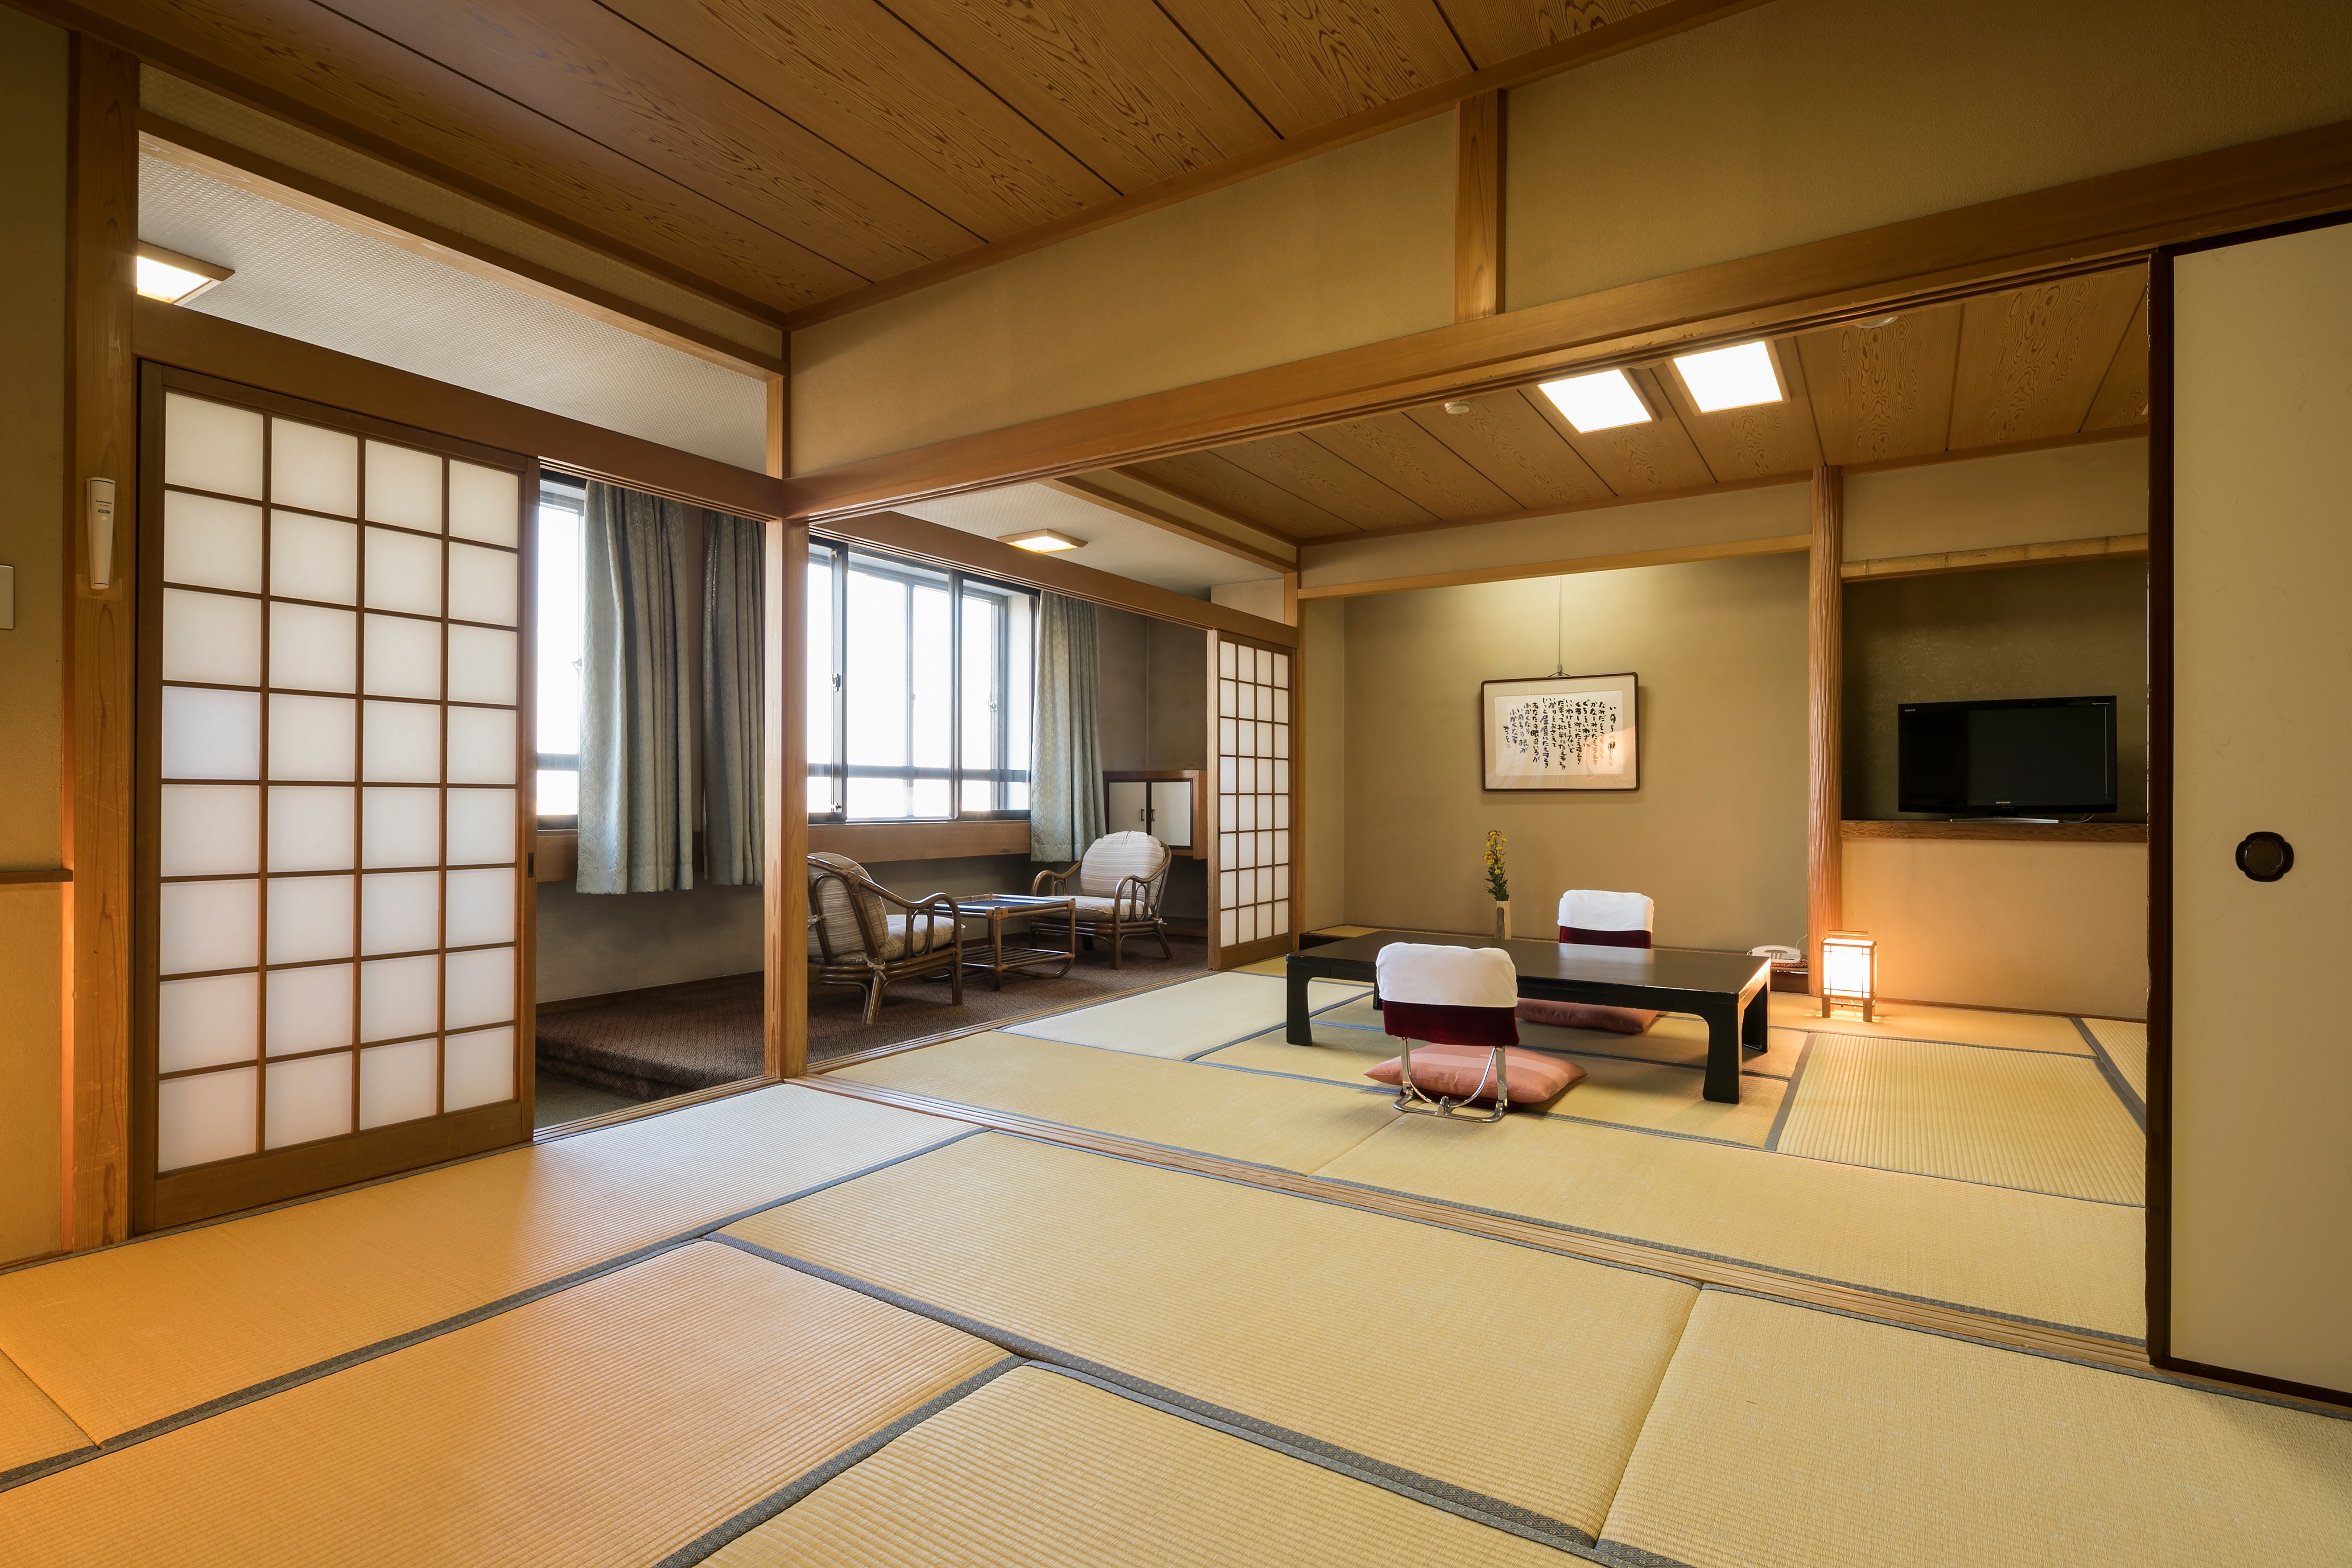 Room: West Building (10 + 6 tatami mats, Japanese-style room) Capacity: 2 to 6 people Recommended for groups and families.